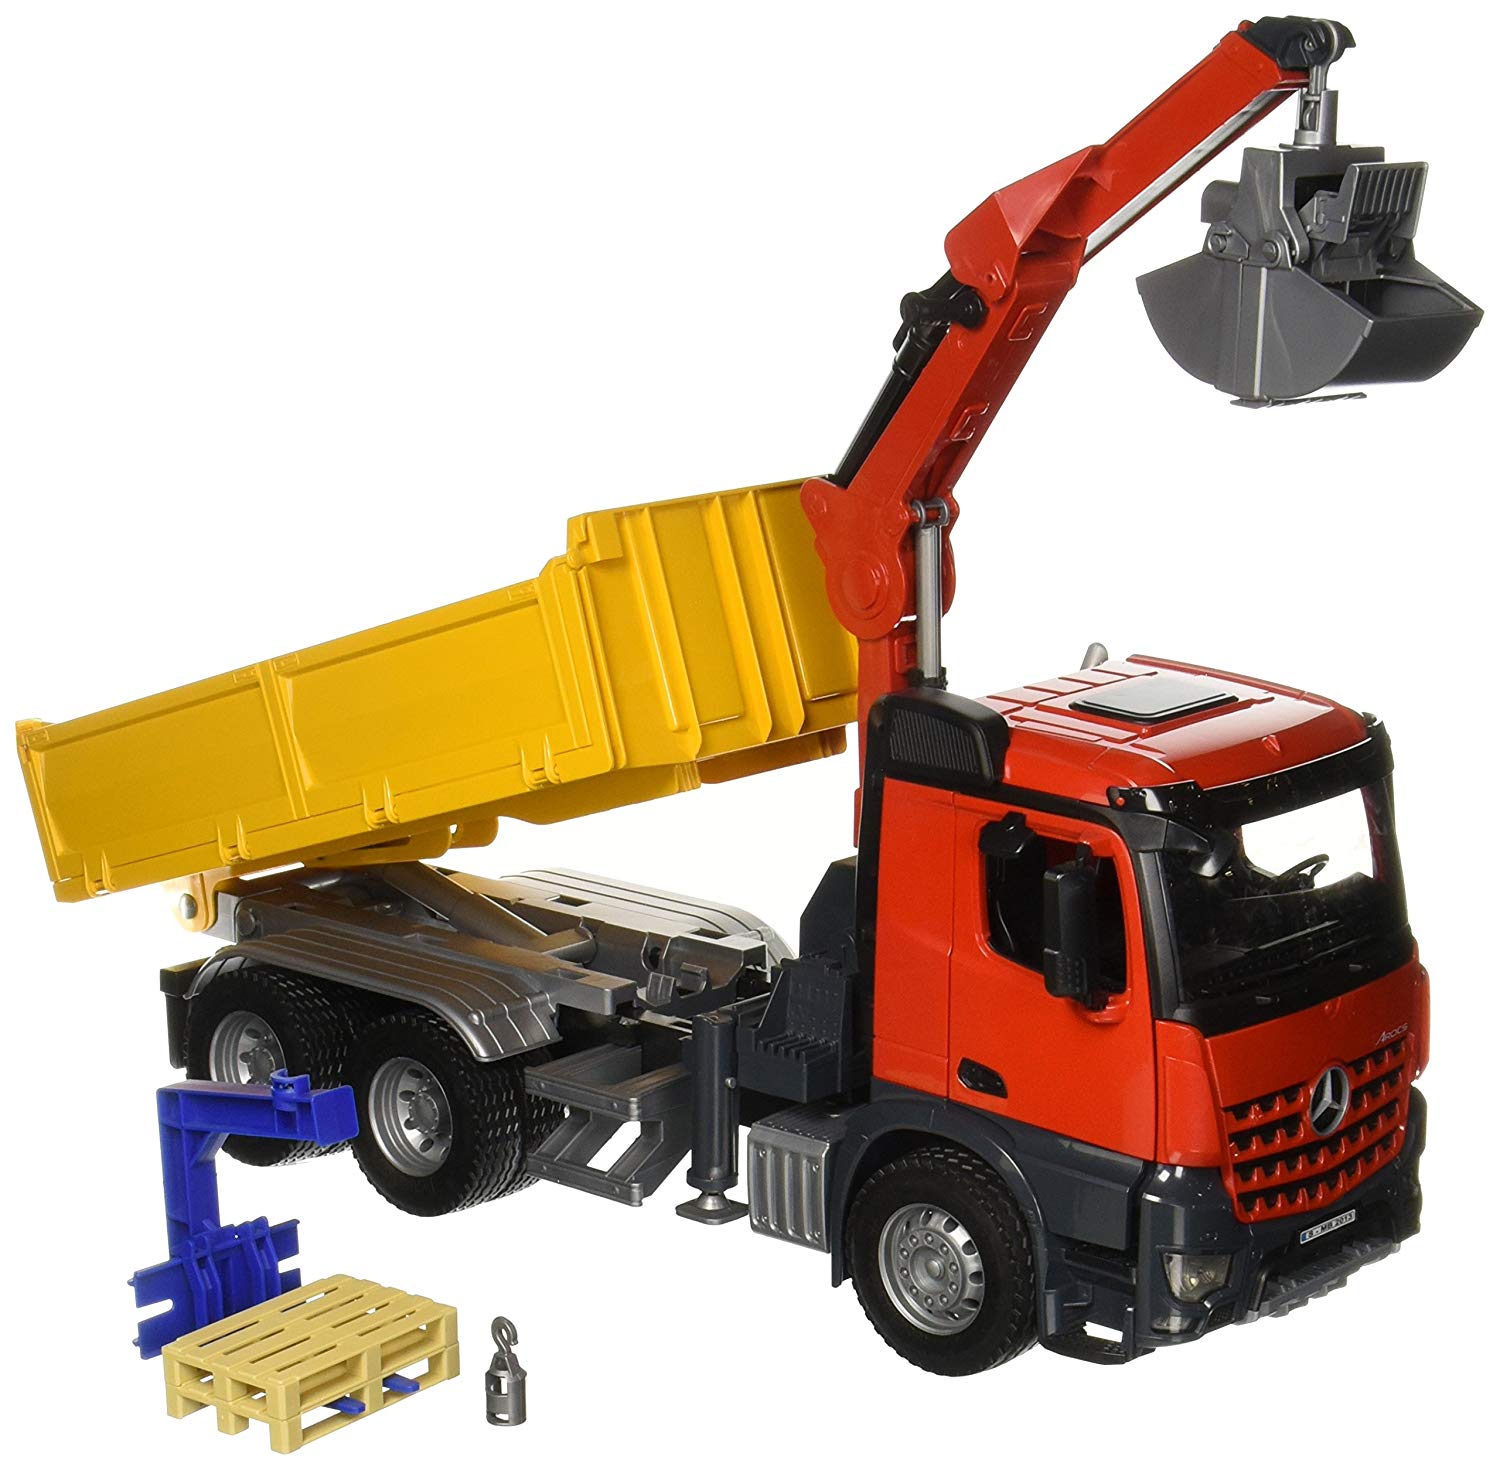 Bruder Mb Arocs Construction Truck With Crane Clamshell Buckets And Pallets